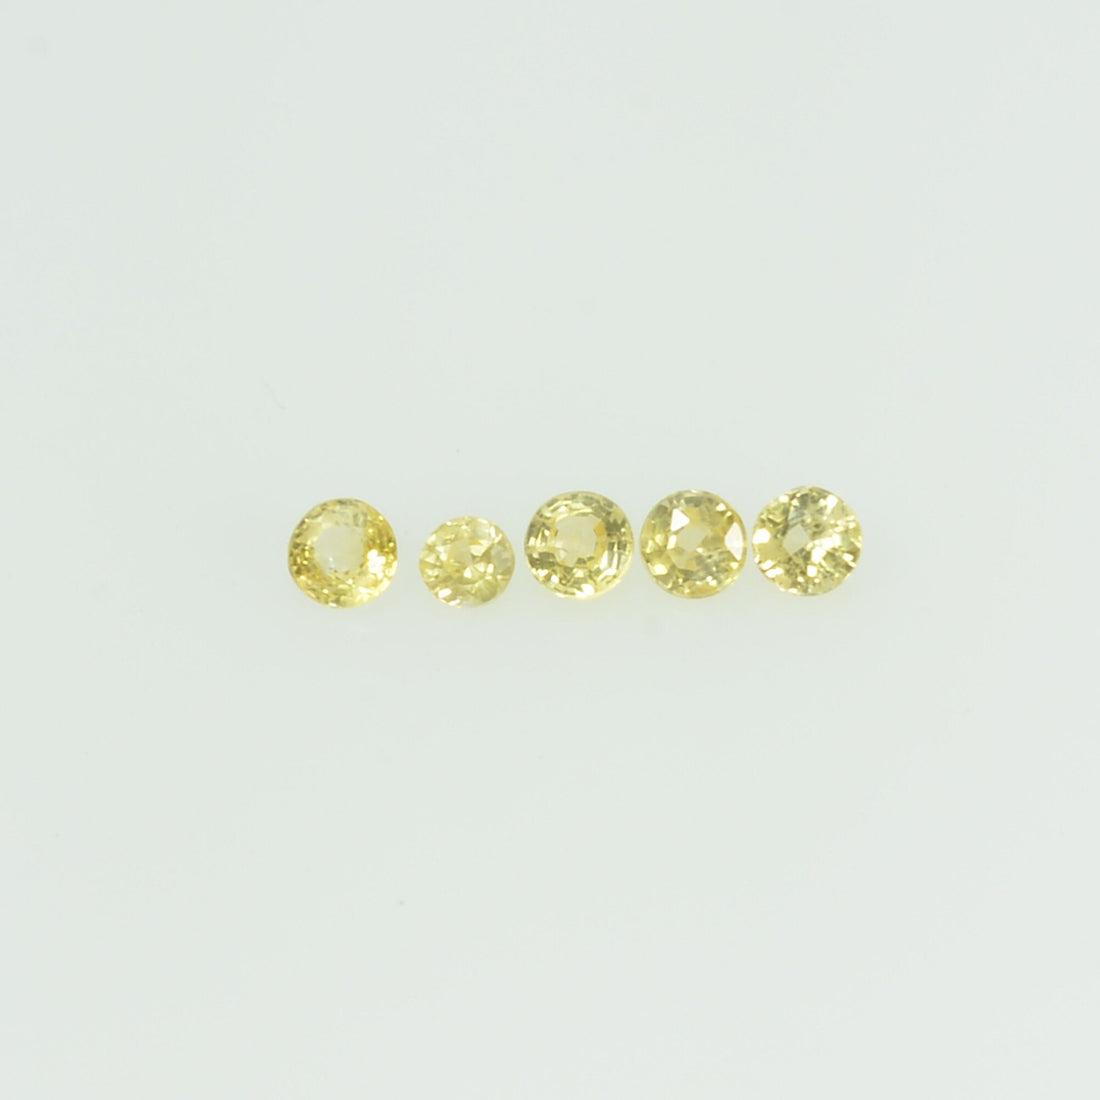 1.4-1.7 mm lot Natural Yellow Sapphire Loose Gemstone Round Cut